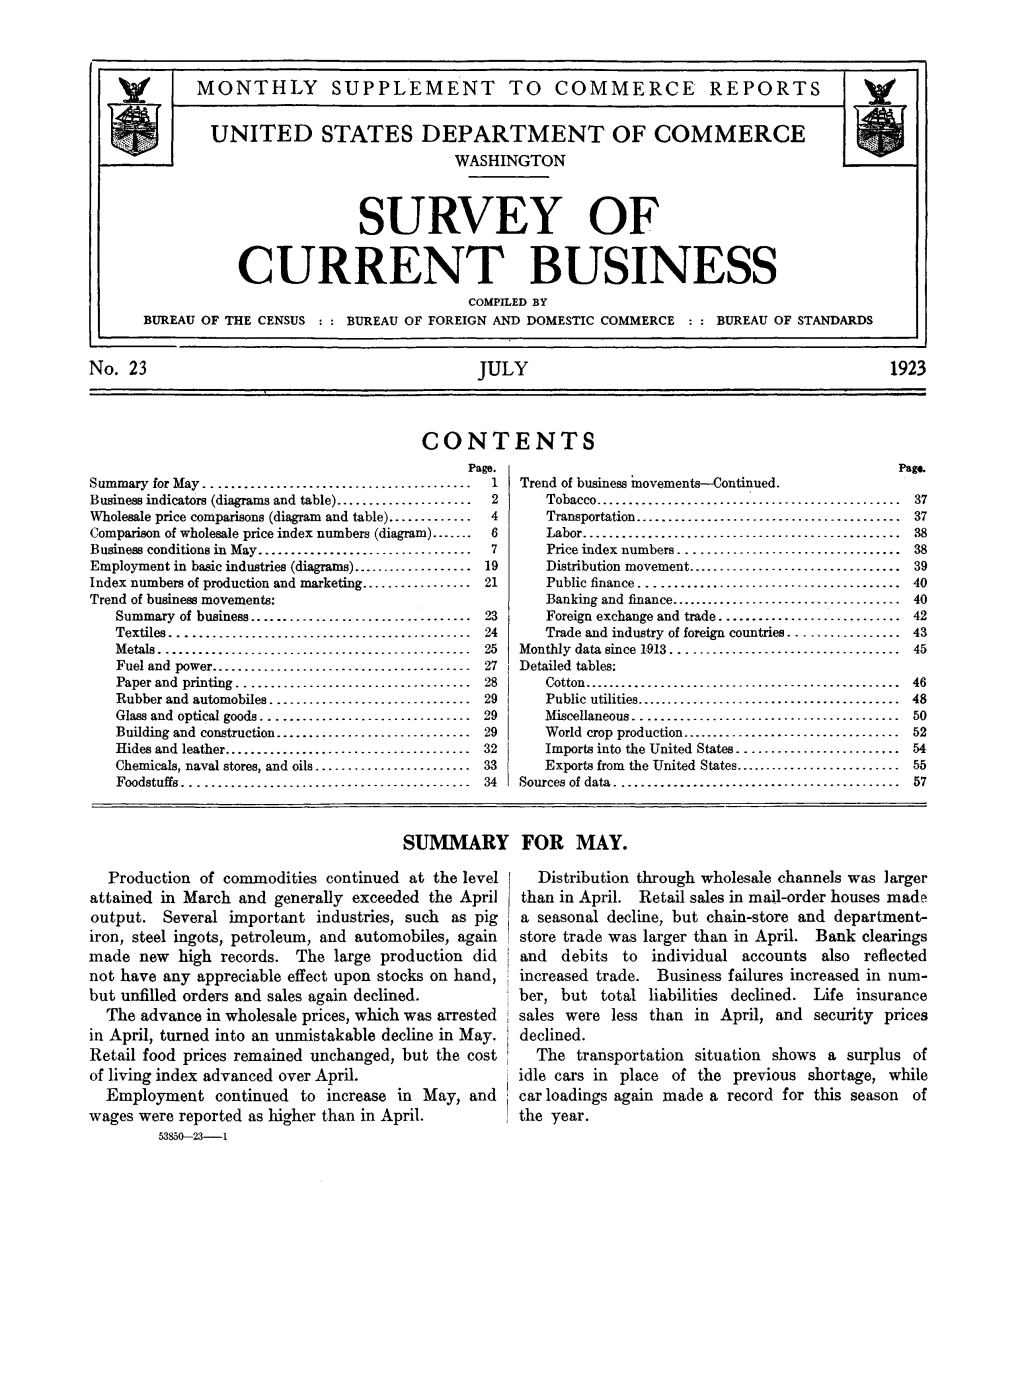 Survey of Current Business July 1923